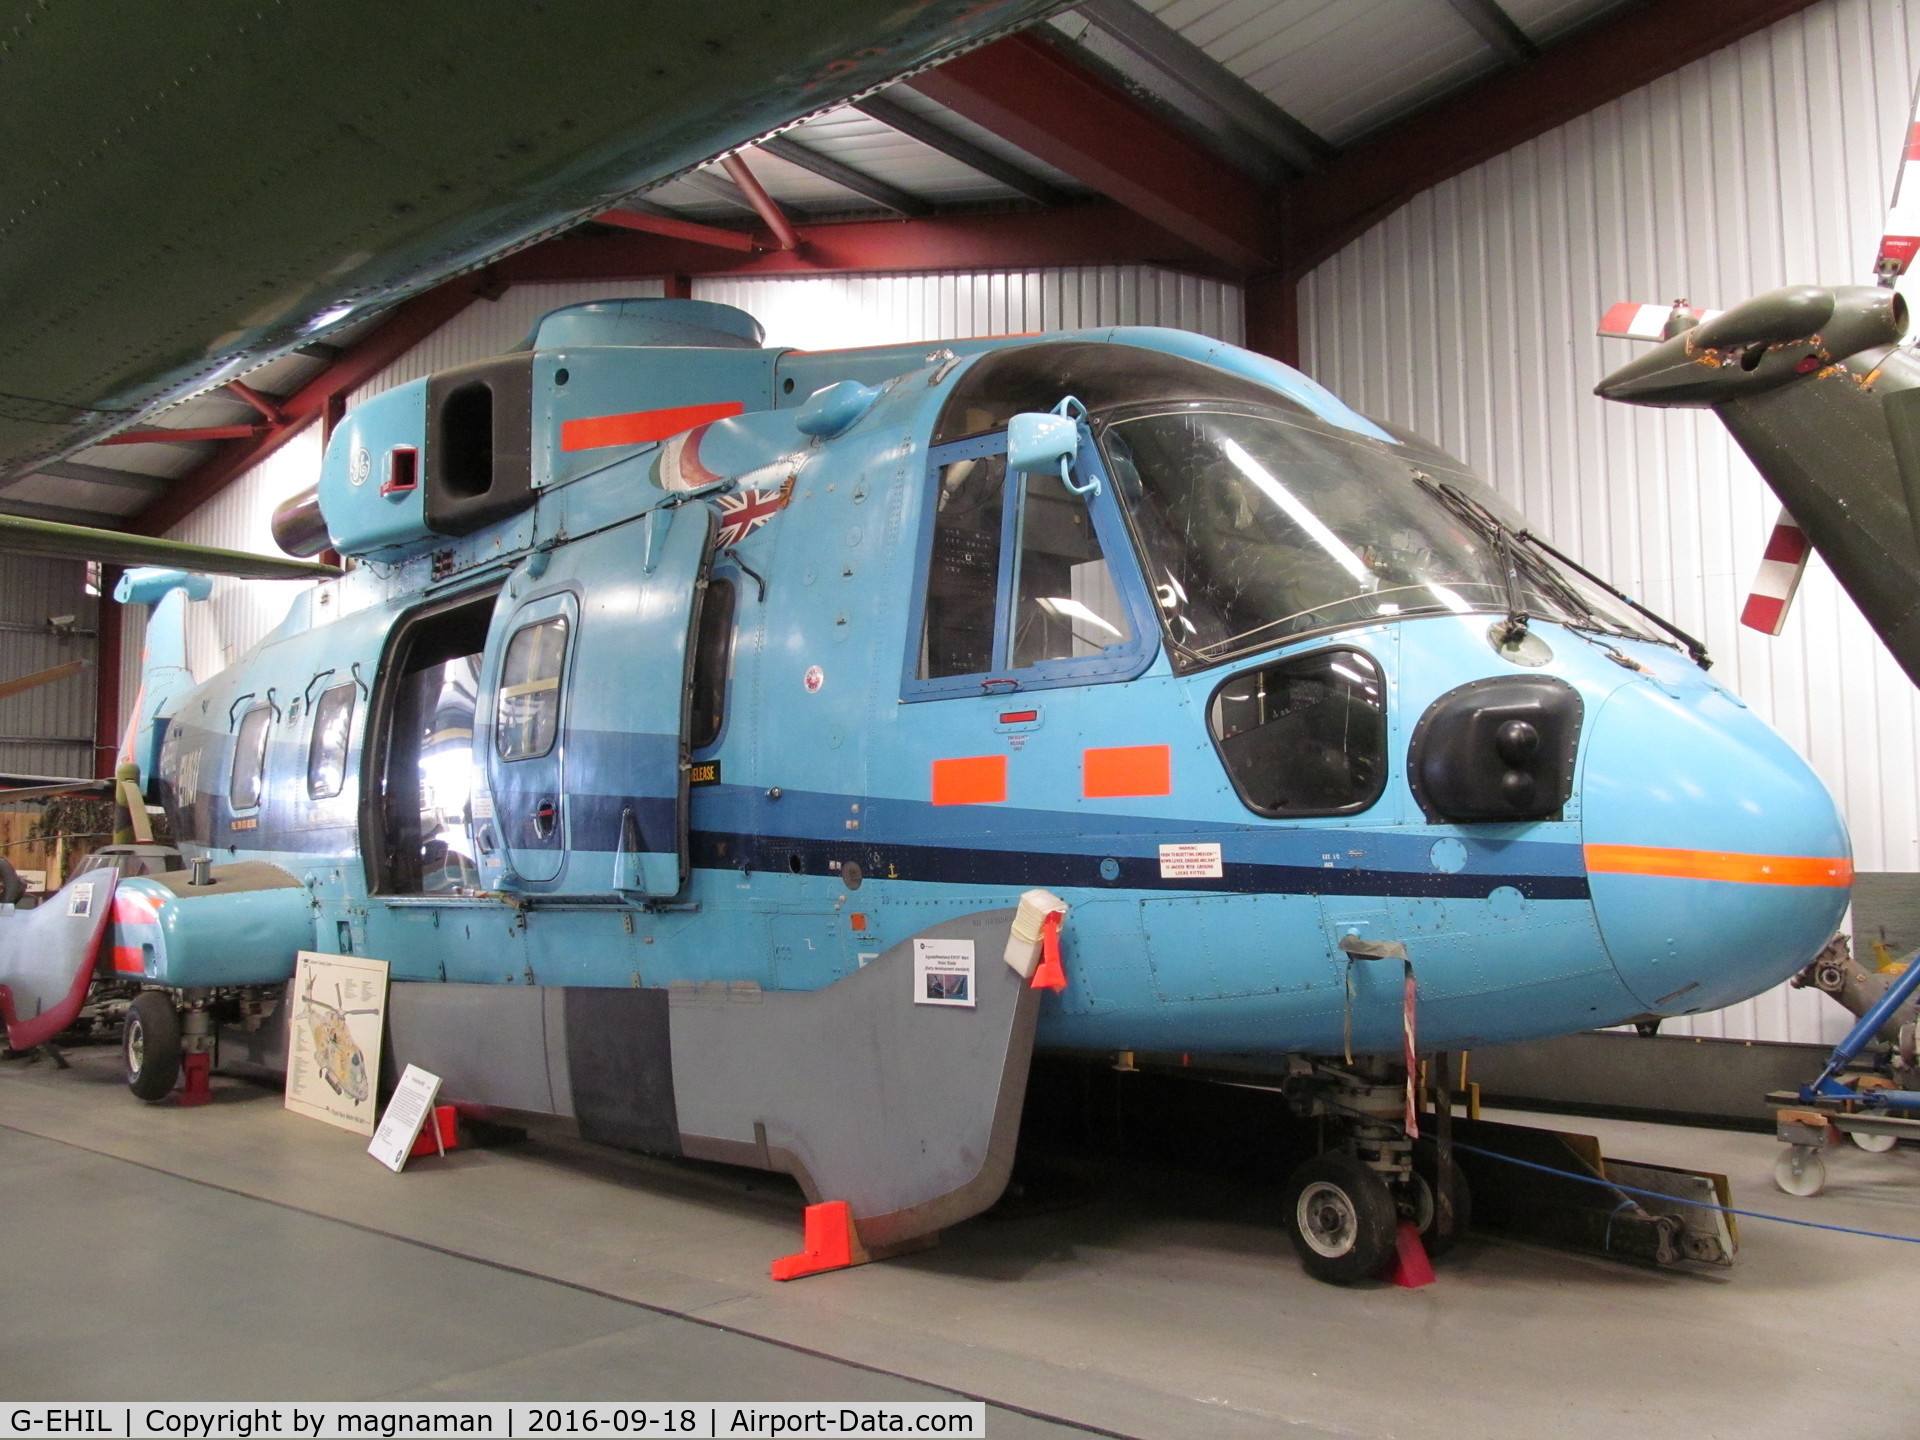 G-EHIL, 1987 AgustaWestland EH-101 C/N 50003/PP3, Now on display in The Helicopter Museum, Weston-super-Mare, UK.